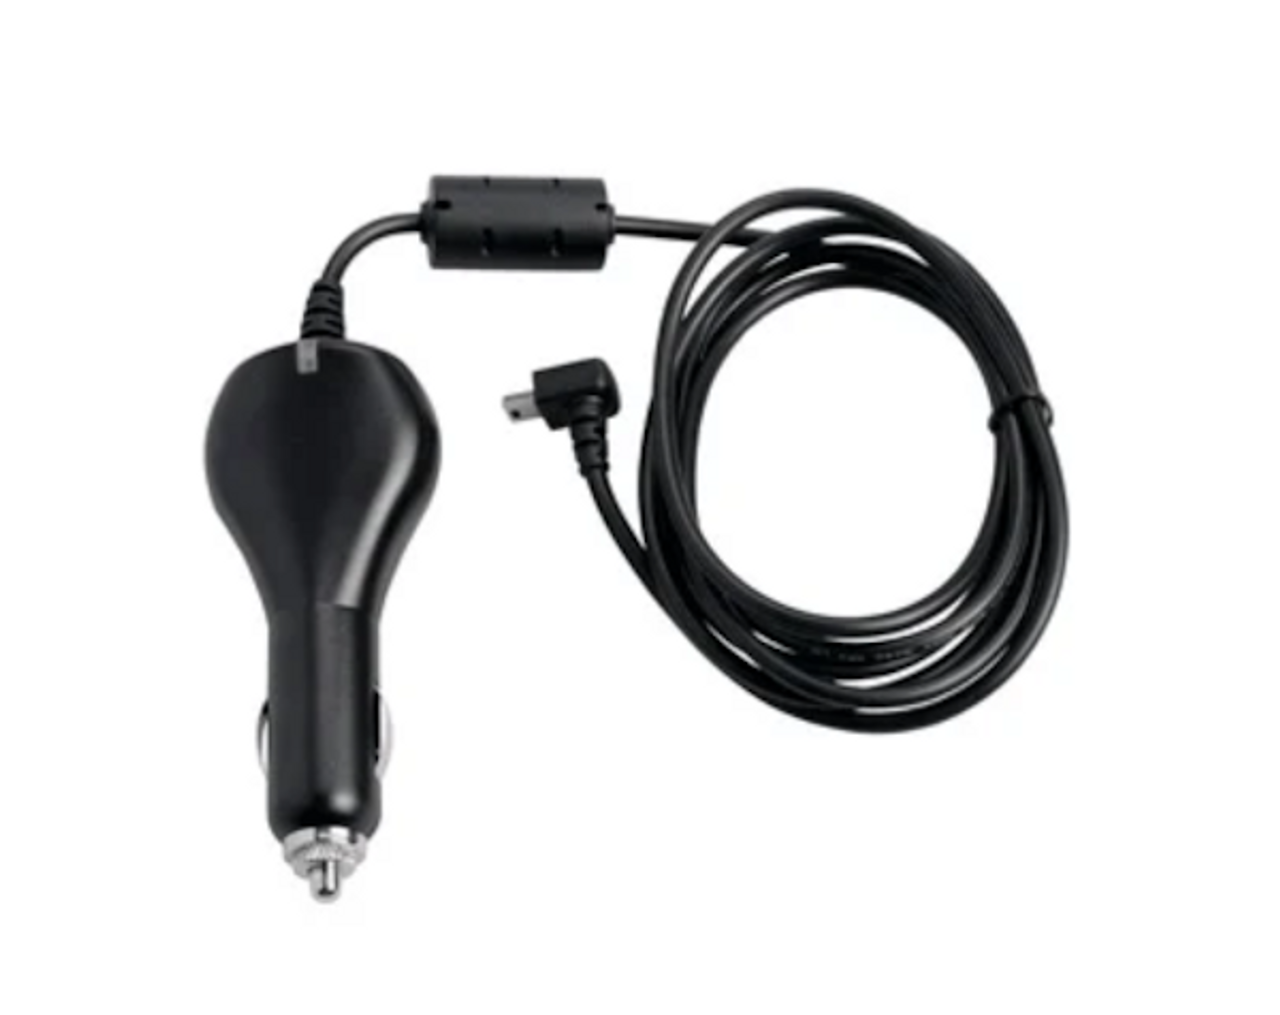 garmin vehicle power charger cable - works with 12v cigarette lighter - at okie dog supply